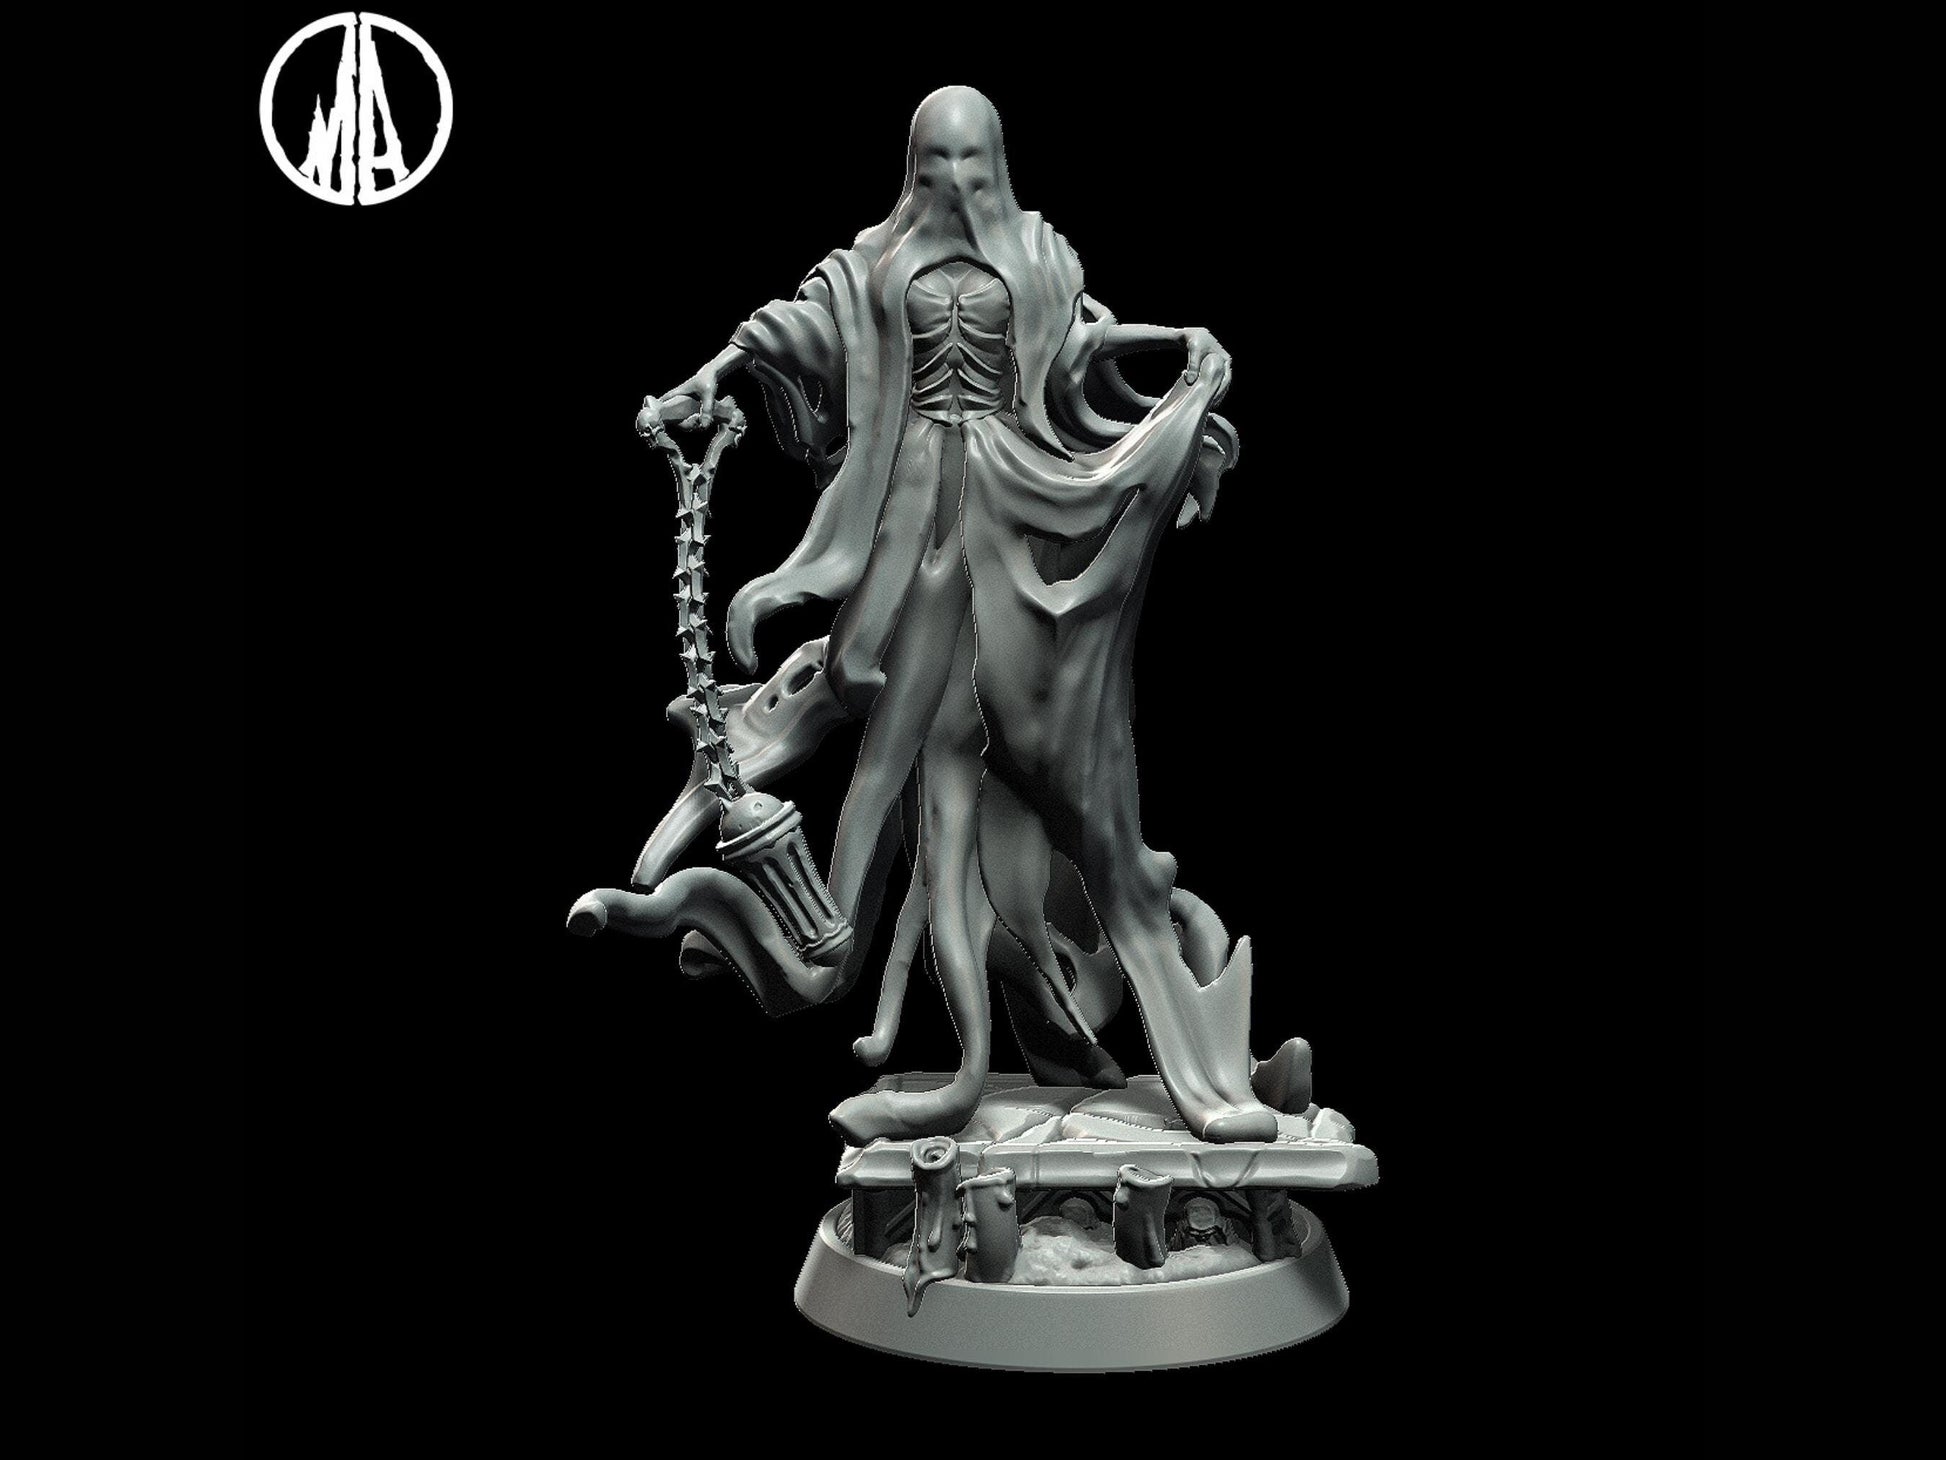 Wailing Hag Miniature - 3 Poses - 28mm scale Tabletop gaming DnD Miniature Dungeons and Dragons, dnd 5e wargaming - Plague Miniatures shop for DnD Miniatures